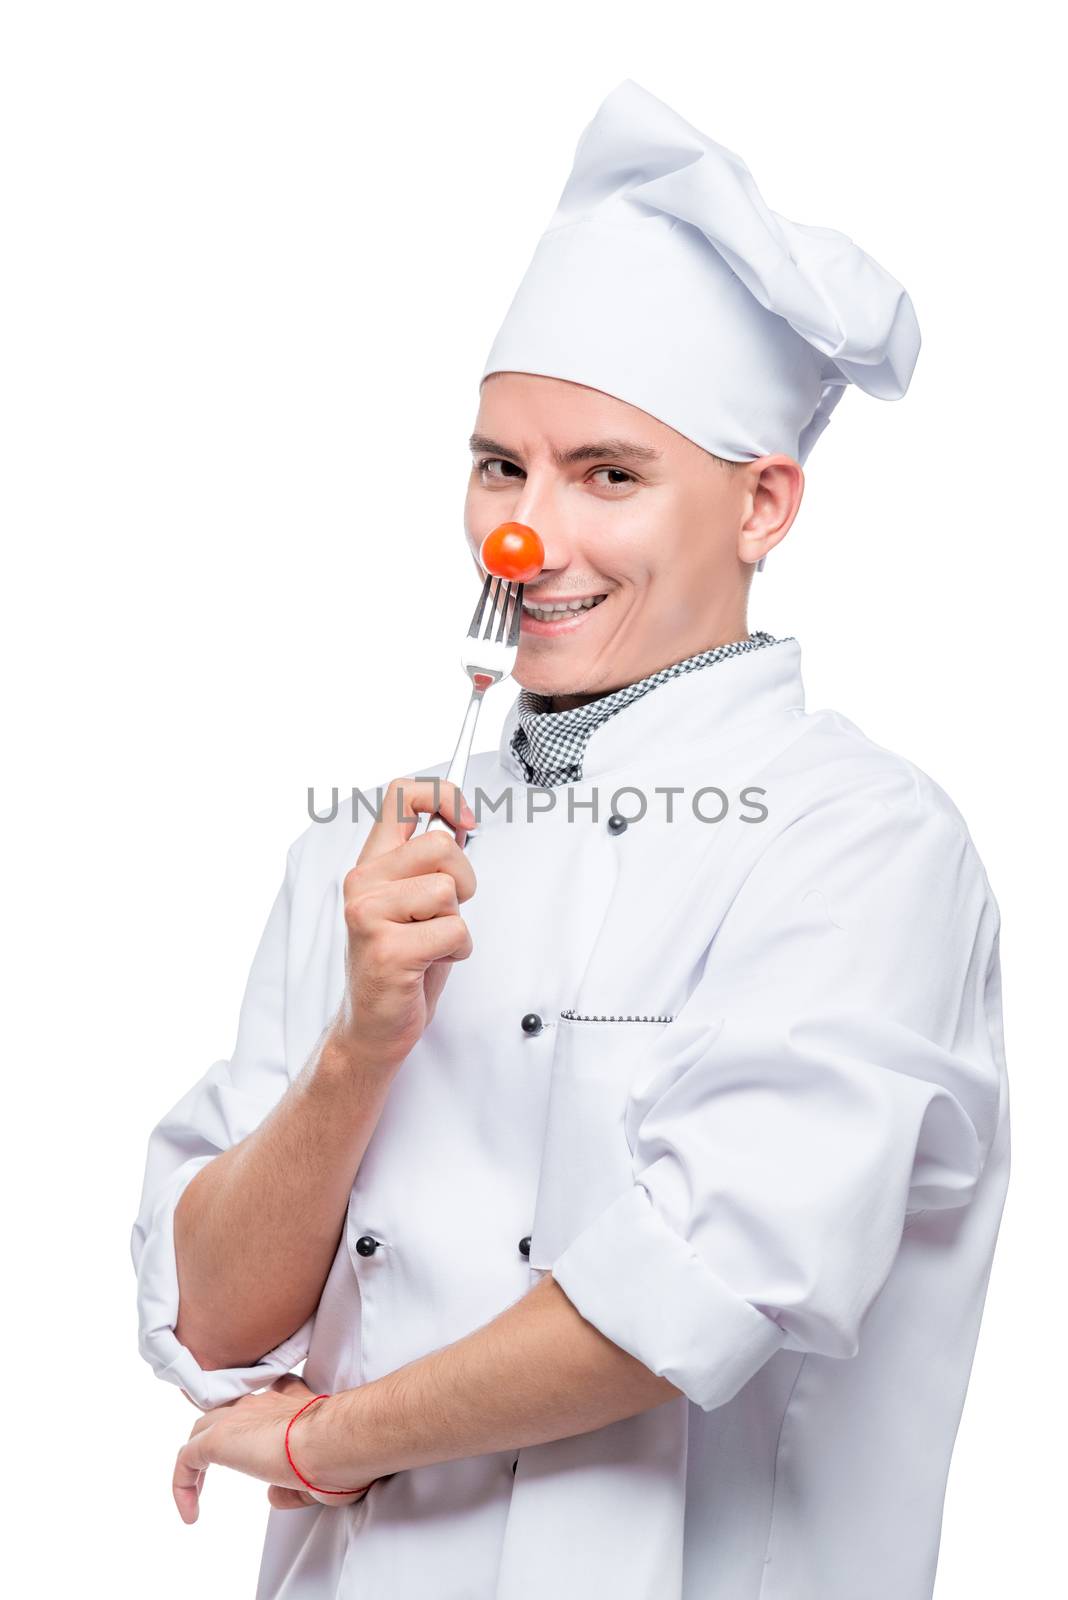 cooks with cherry tomato on a fork, shot on a white background in the studio